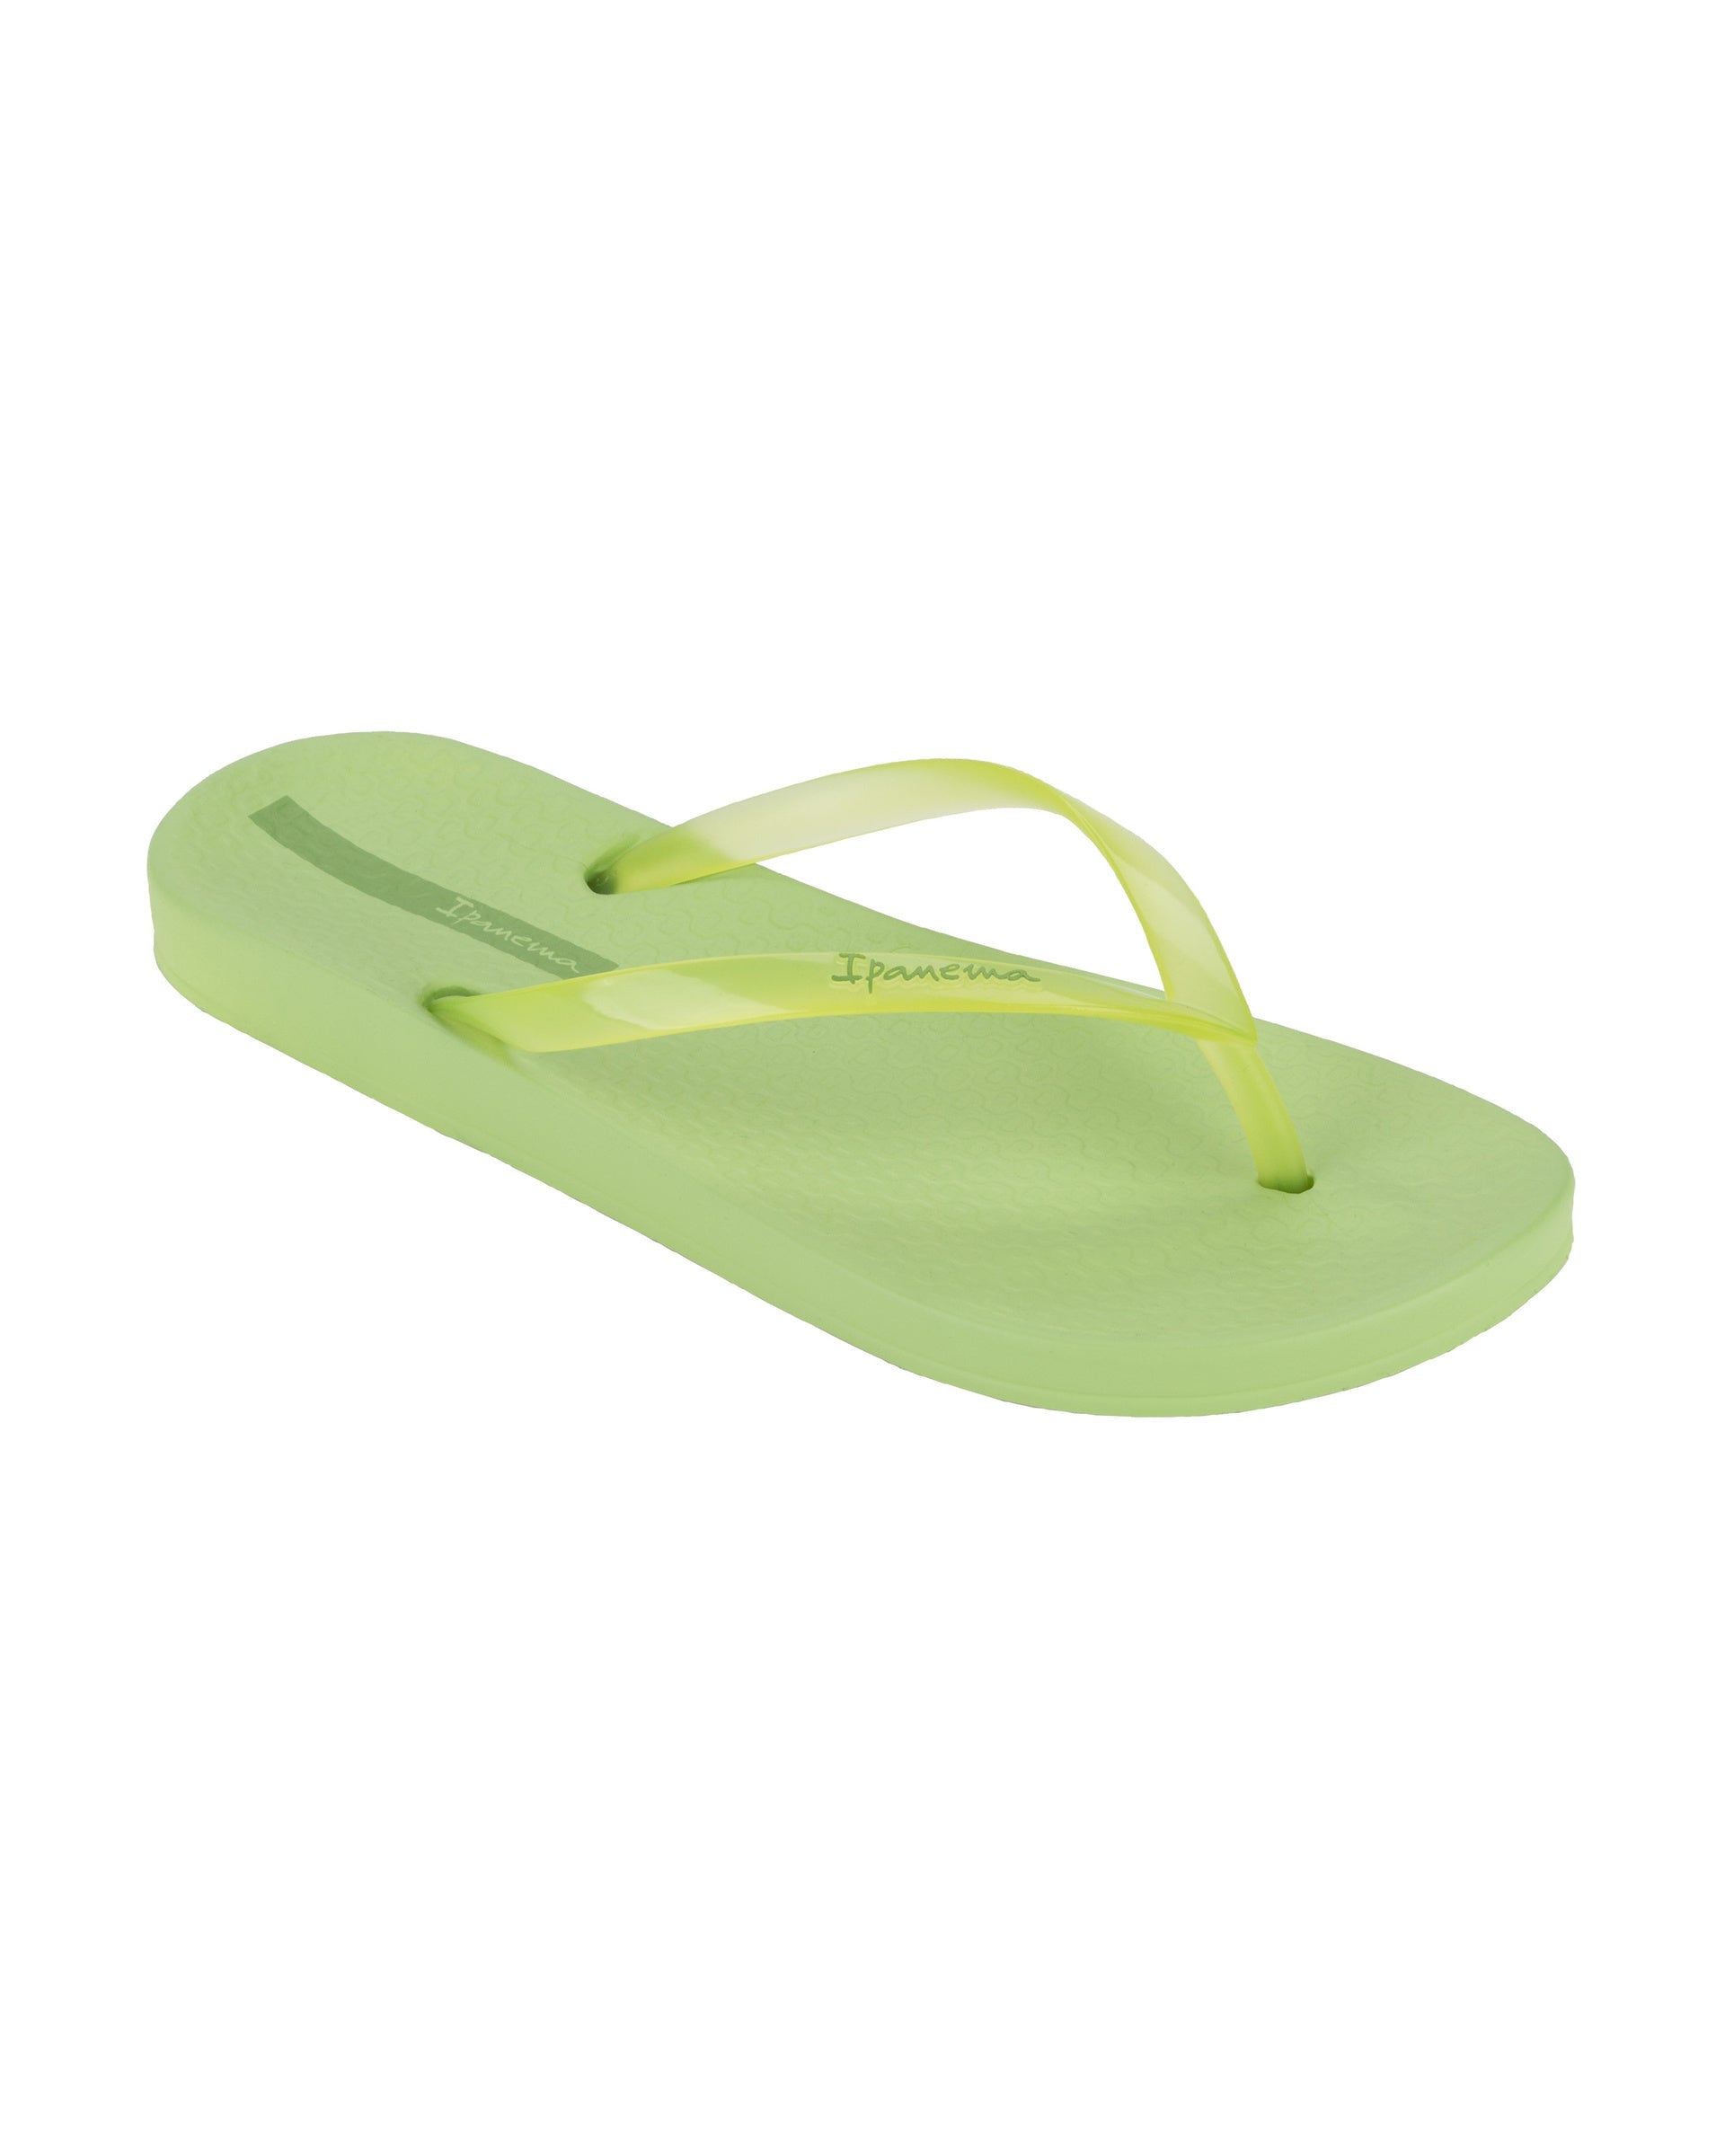 Angled view of a green Ipanema Ana Connect women's flip flop with a clear green strap.